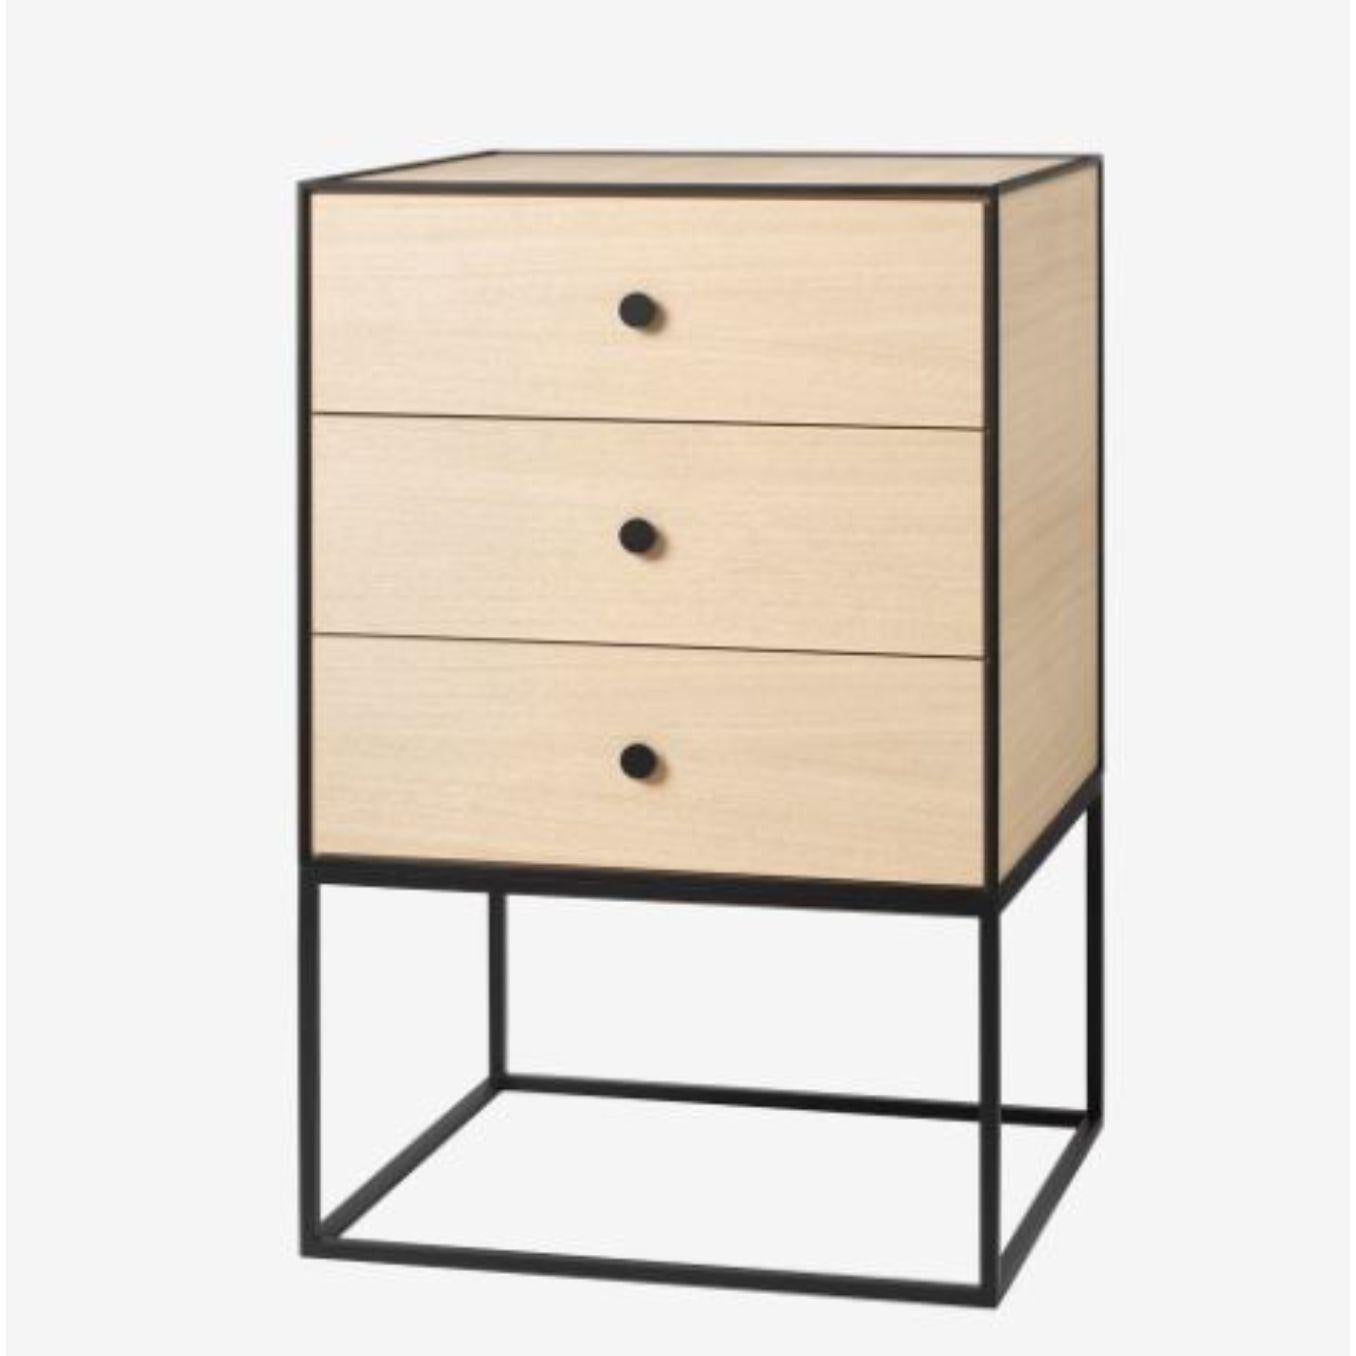 Danish 49 Black Ash Frame Sideboard with 3 Drawers by Lassen